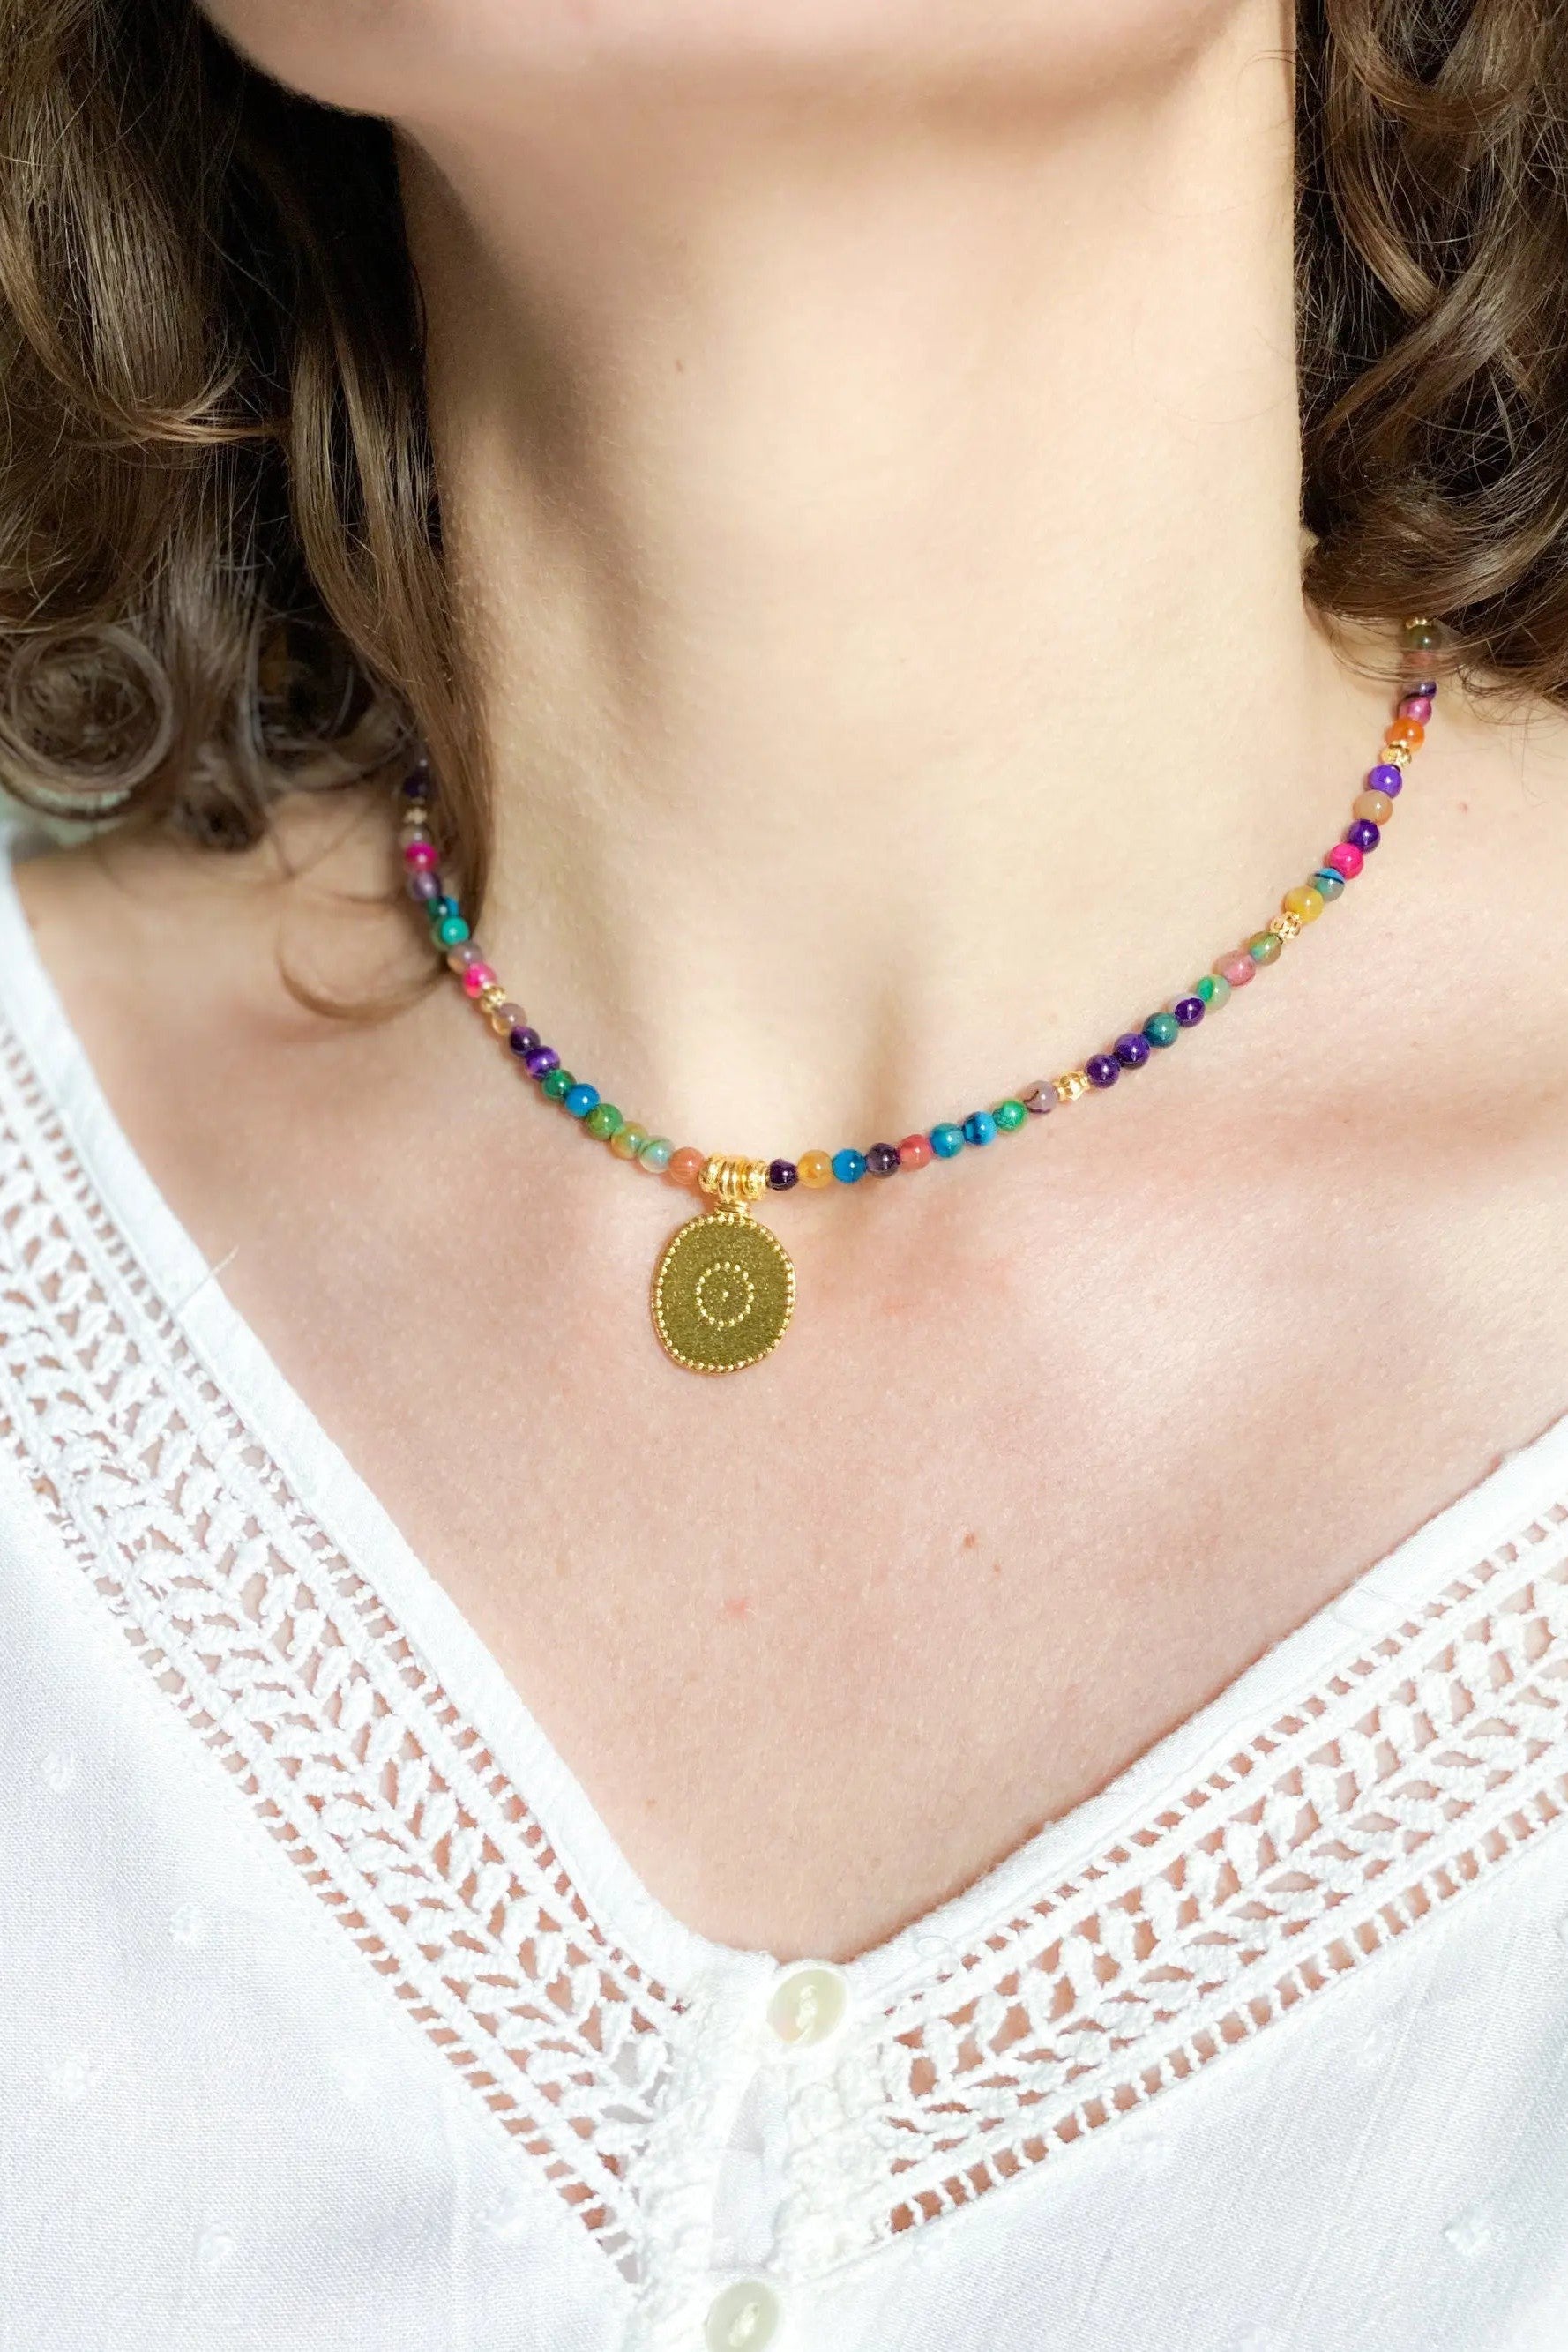 ALKYONI Heishi necklace with gold tribal pendant, Boho chic Agate Necklace, Evil eye choker, Collier pierre femme, Gift for her